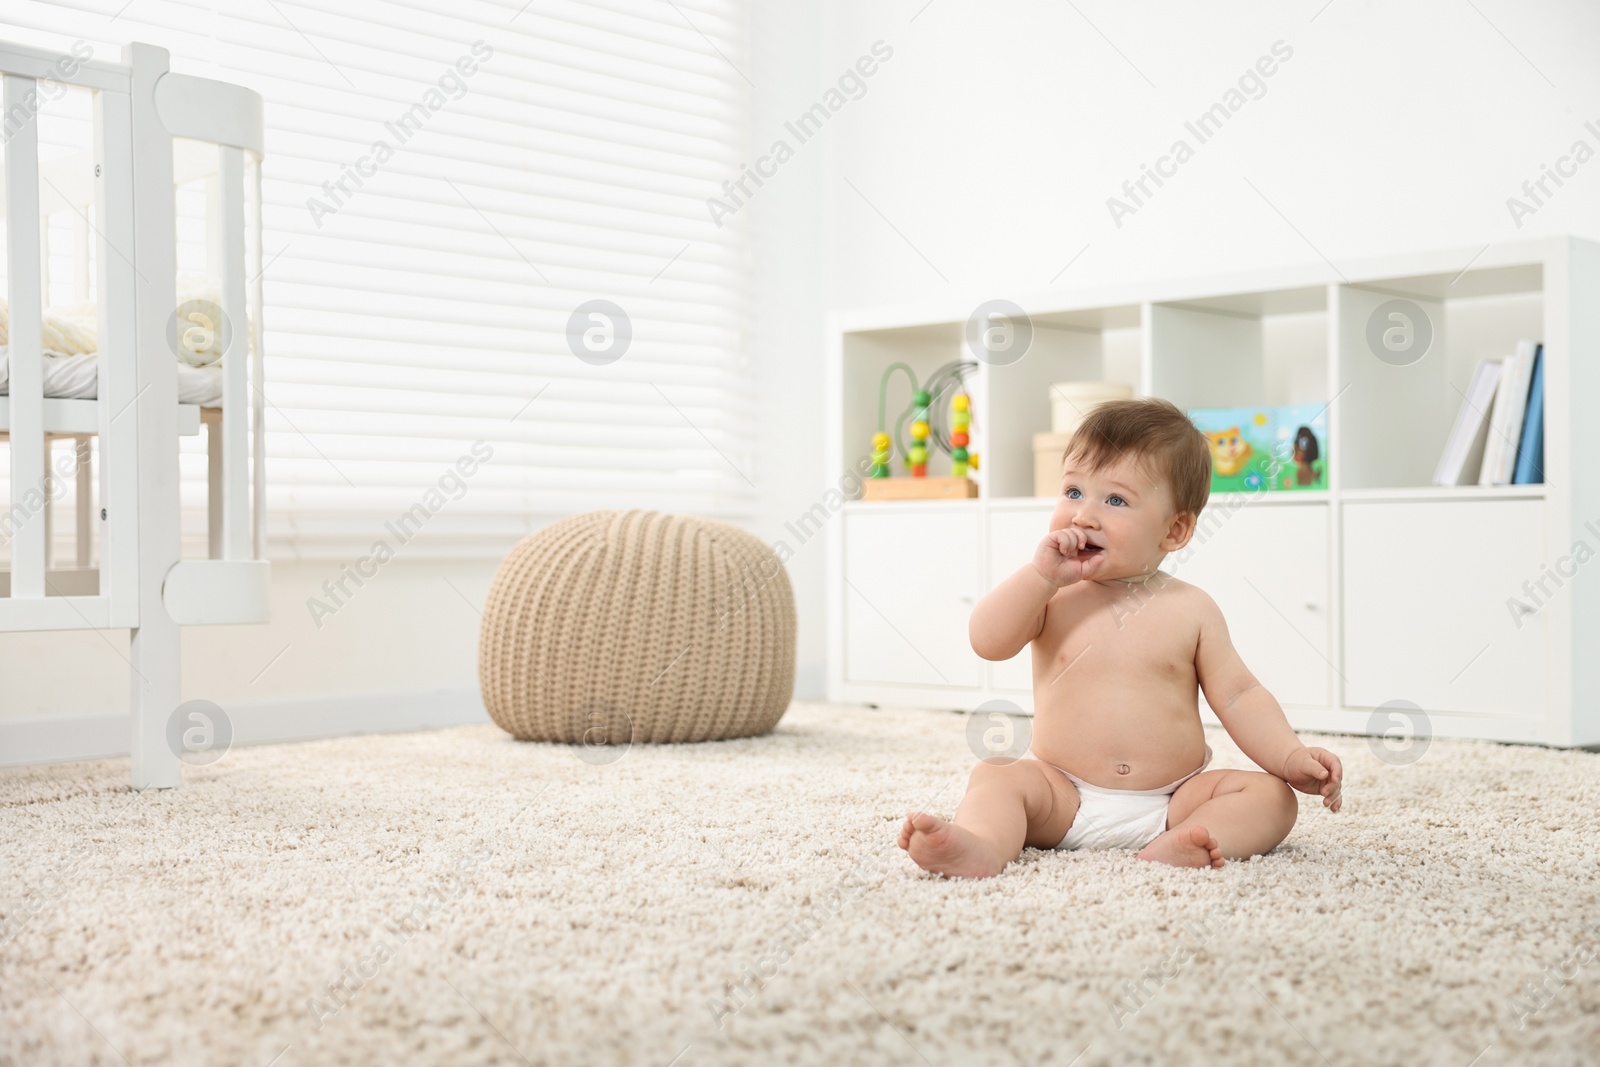 Photo of Cute baby boy sitting on carpet at home